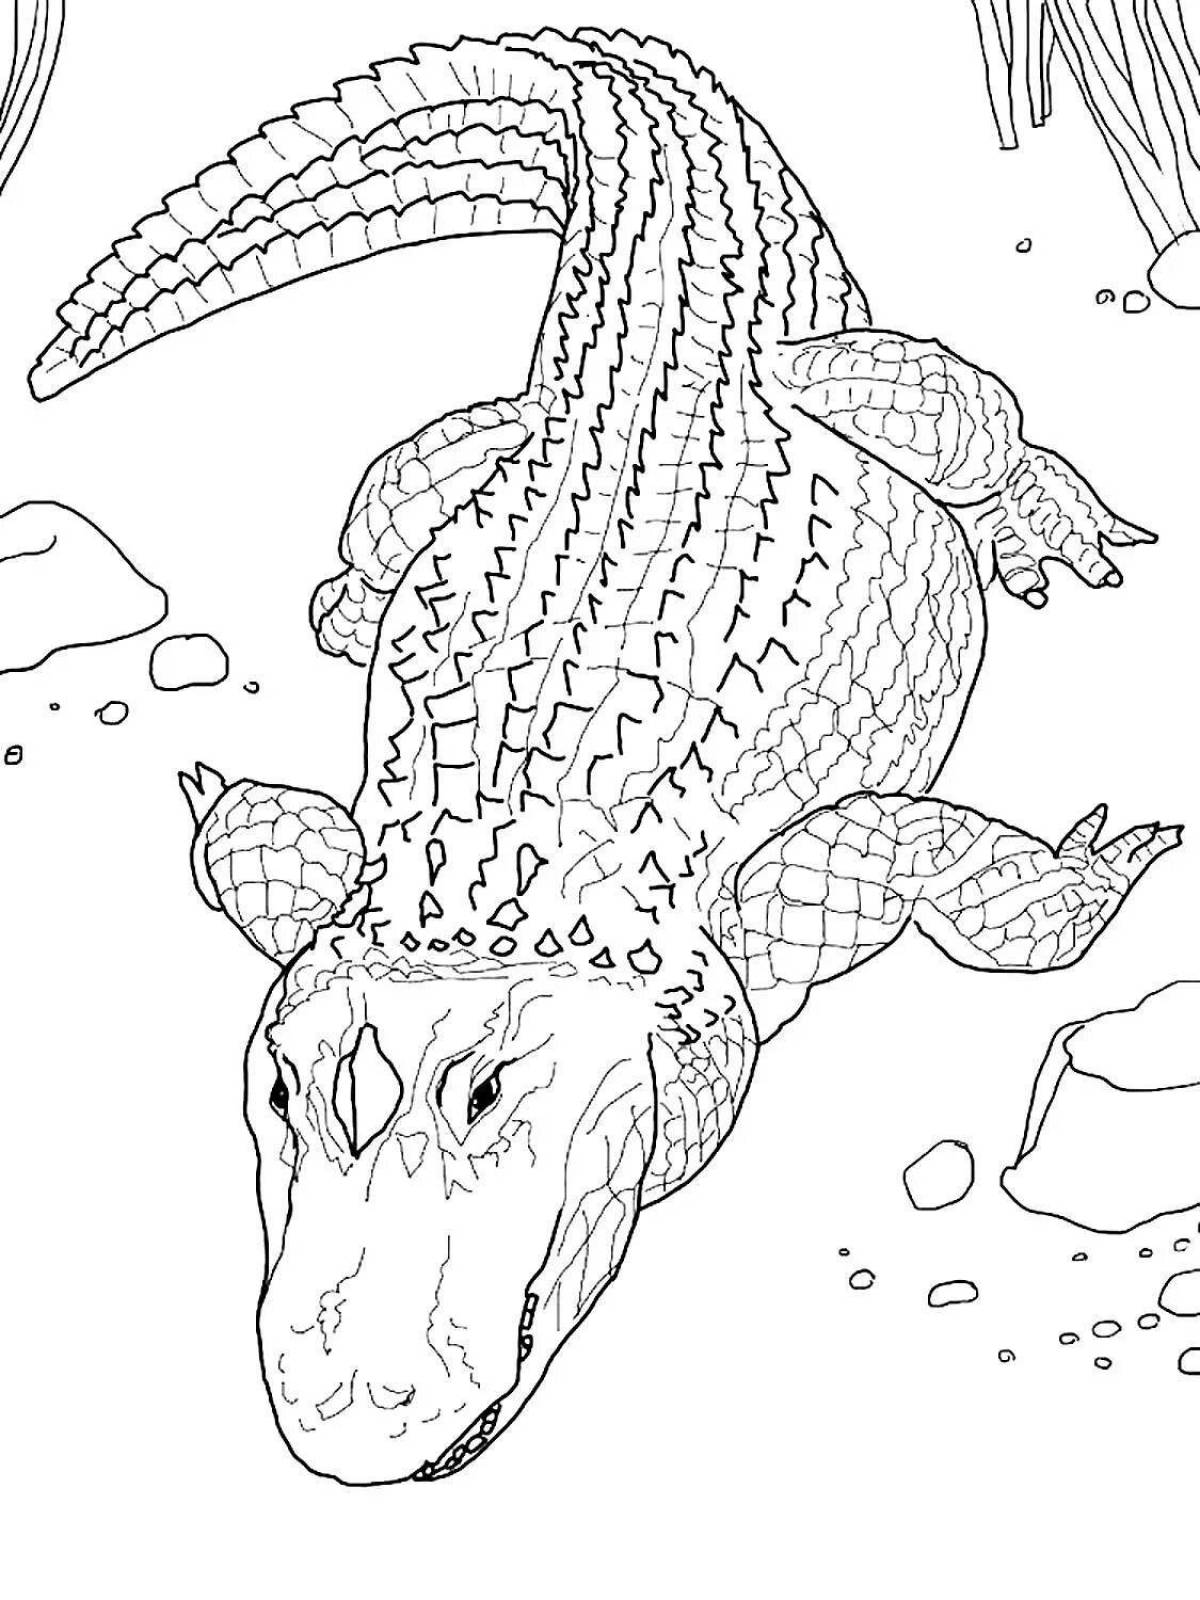 Alligator dynamic coloring page